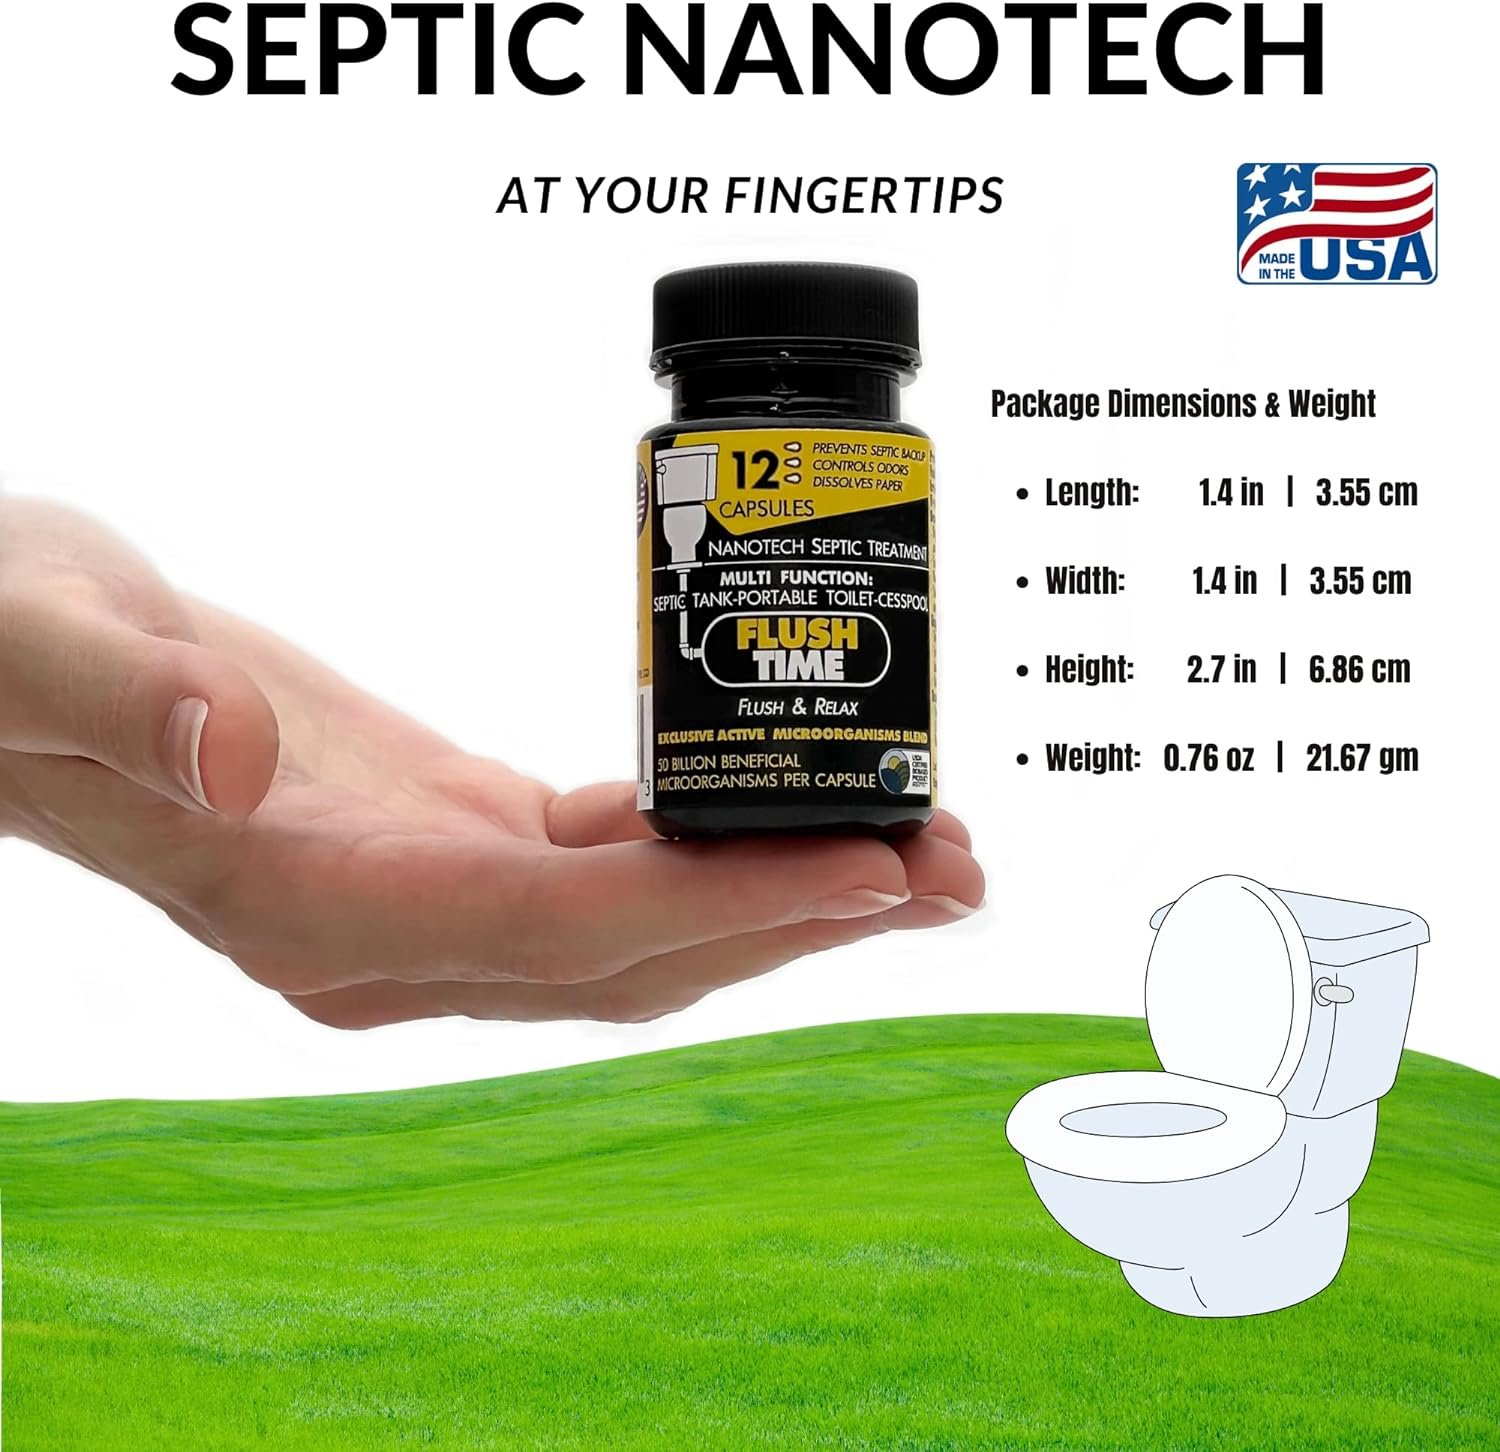 FLUSHTIME Septic Tank Treatment | 12 Month Supply | Avoid Septic Backup | Monthly Preventive Septic Maintenance | Natural Toilet Flushable Septic System Booster Additive | Odor Control